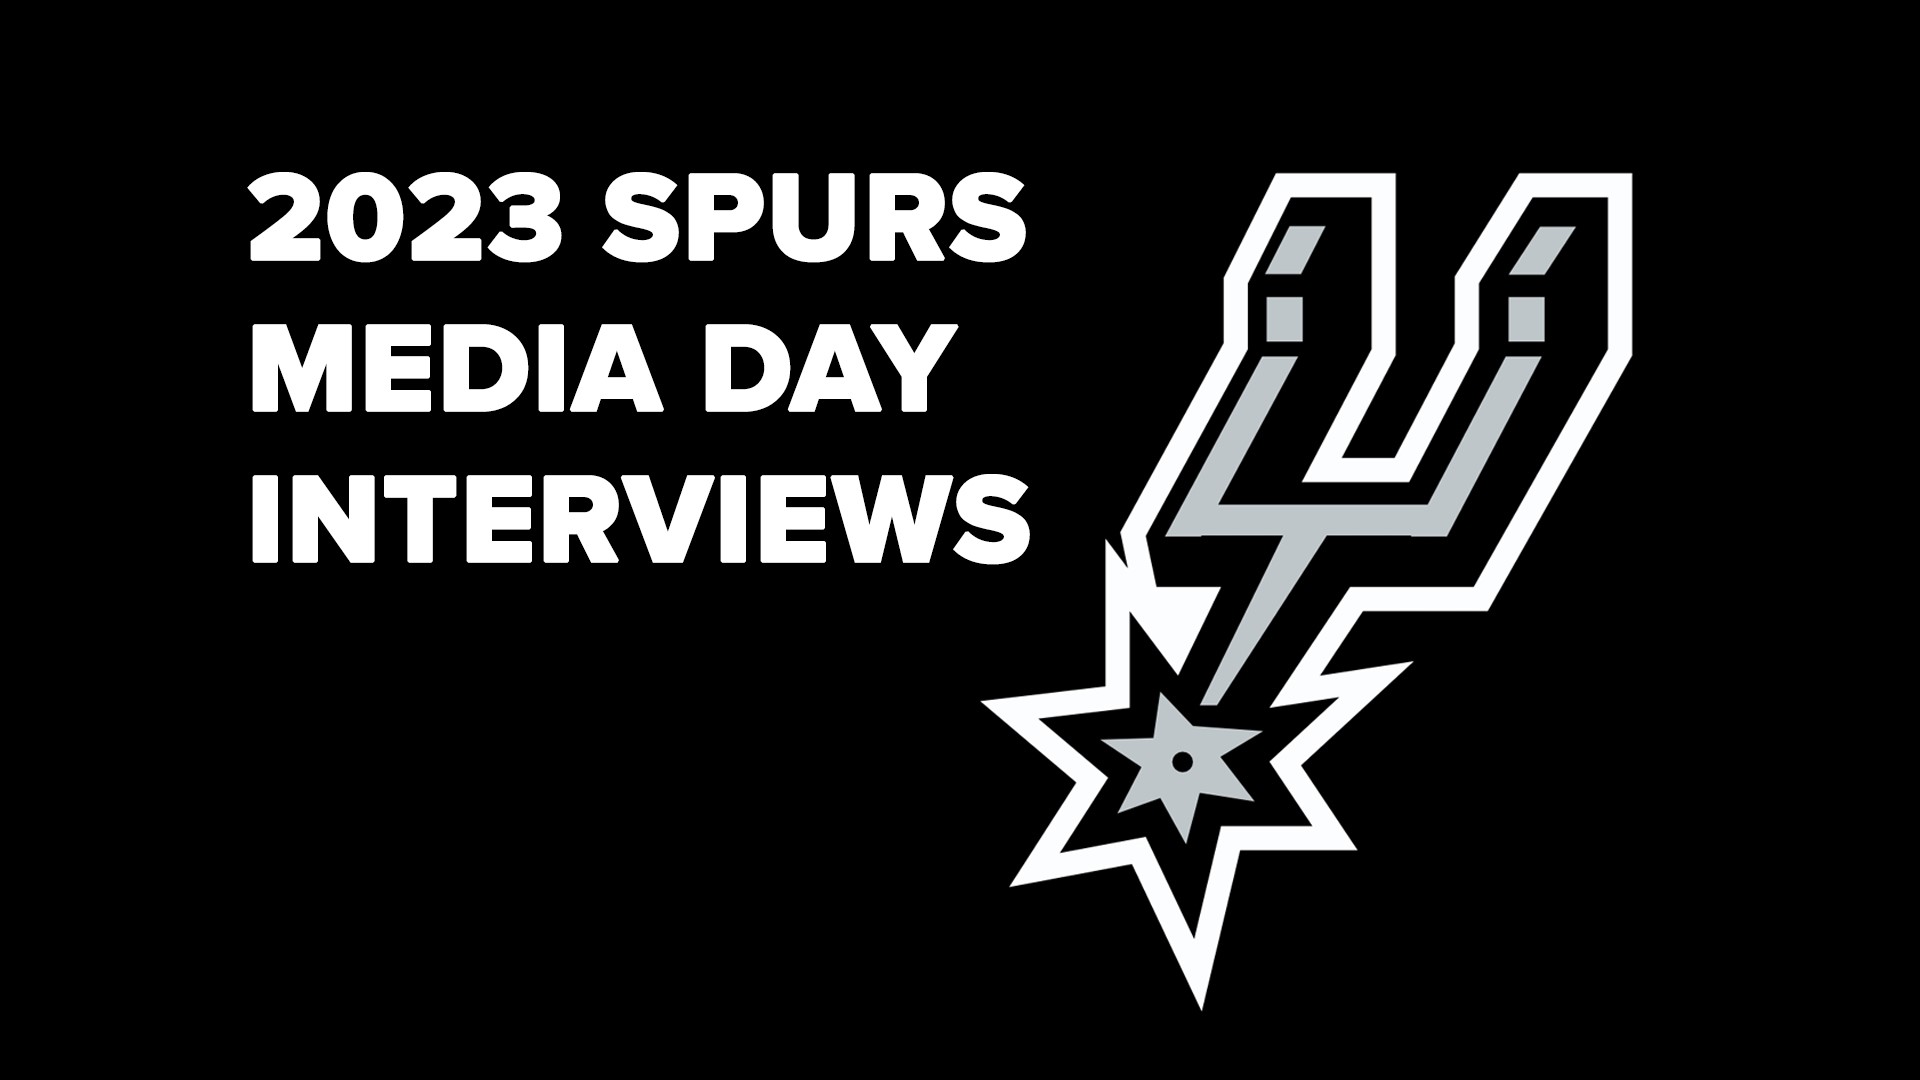 The San Antonio Spurs held their annual Media Day on Monday, October 2, 2023.